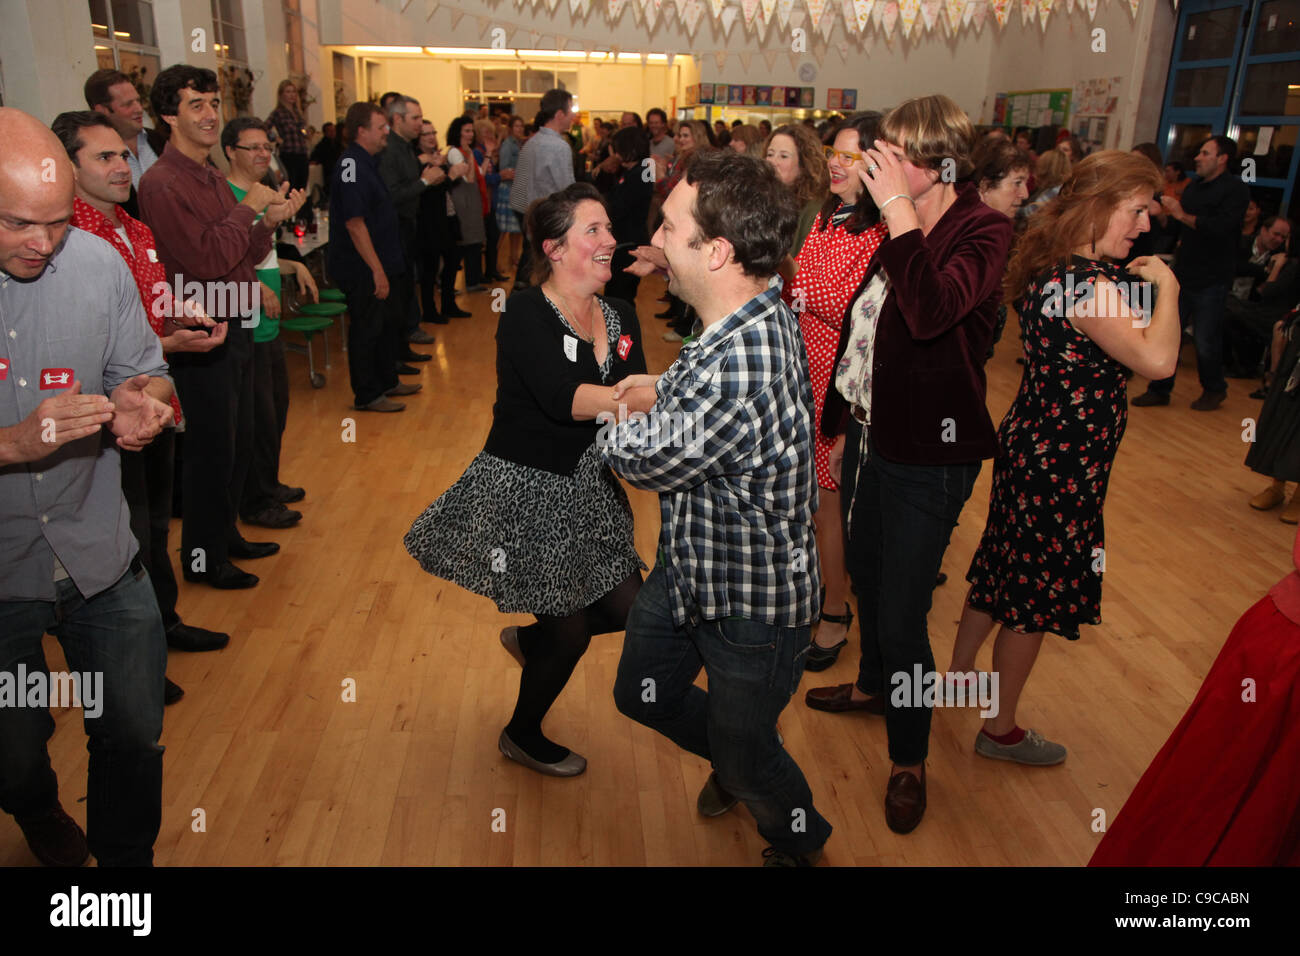 A community barn dance in a organised by a Transition Town (Kensal to Kilburn in London). Stock Photo